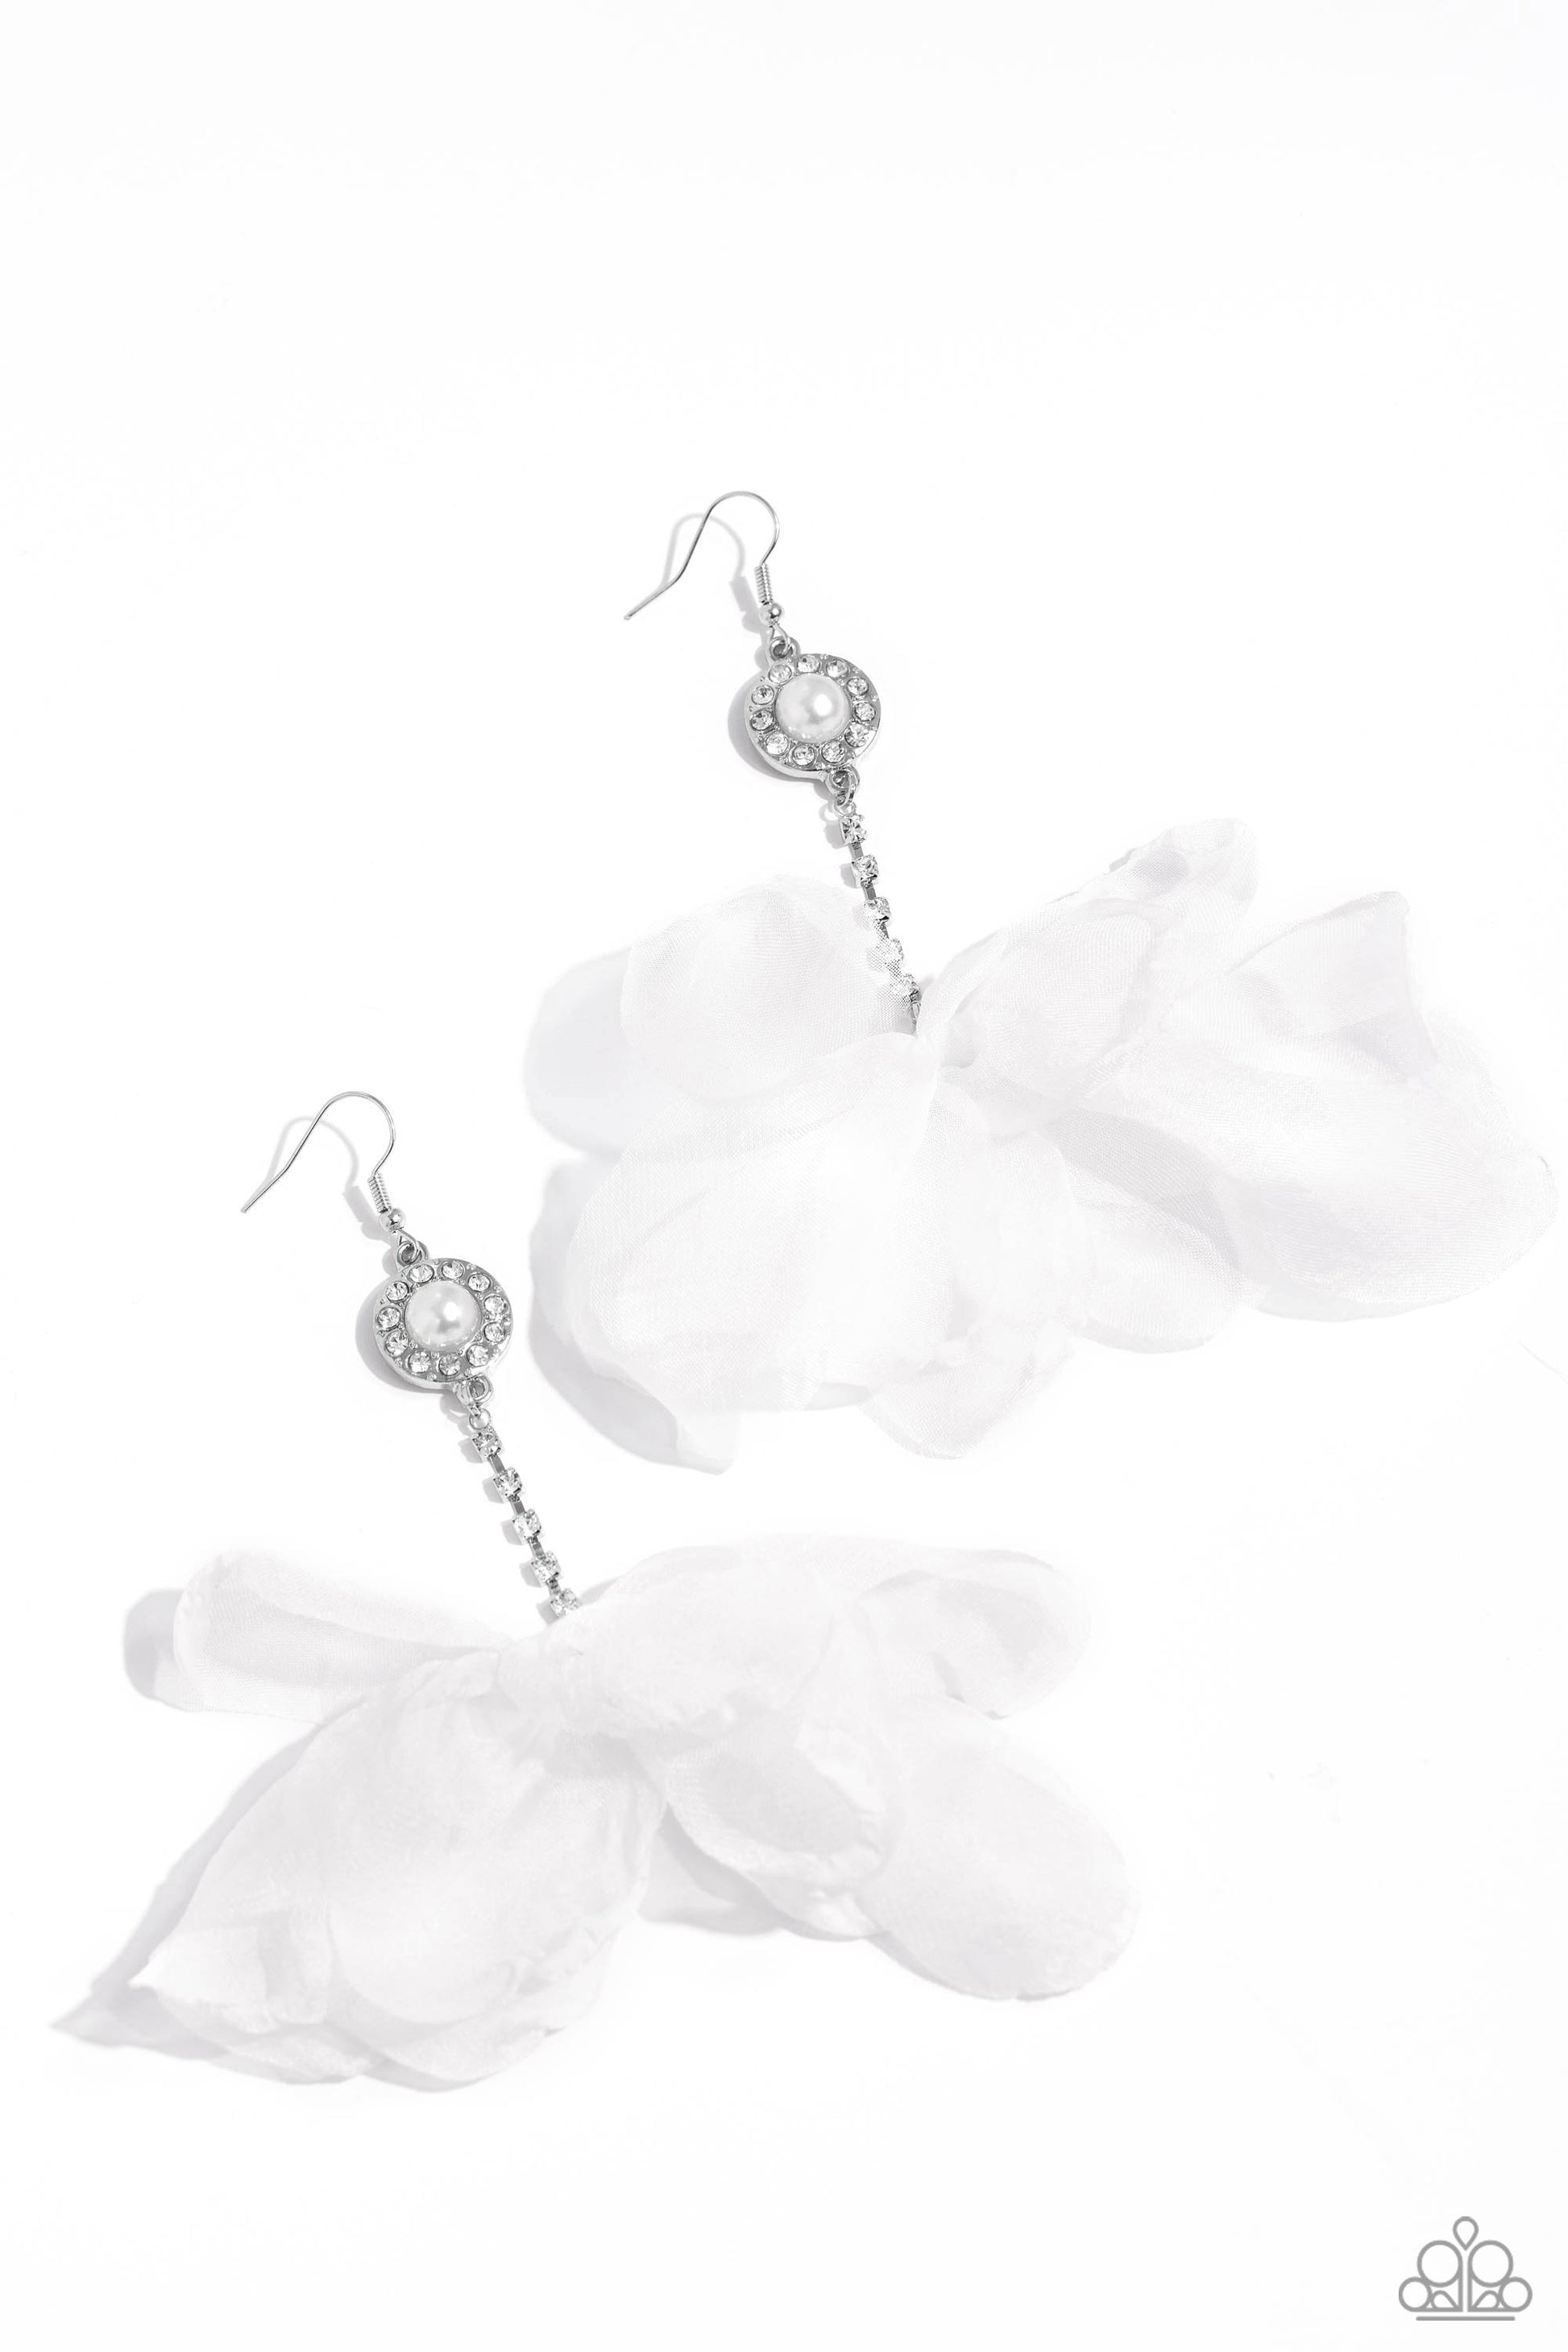 Paparazzi Accessories - Seriously Sheer - White Earrings a sheer, white chiffon bow is tied to the bottom of a rhinestone-encrusted silver square-fitting rod that is attached to a dainty white rhinestone-encrusted pearly pendant for a refined finish. Earring attaches to a standard fishhook fitting.  Sold as one pair of earrings.